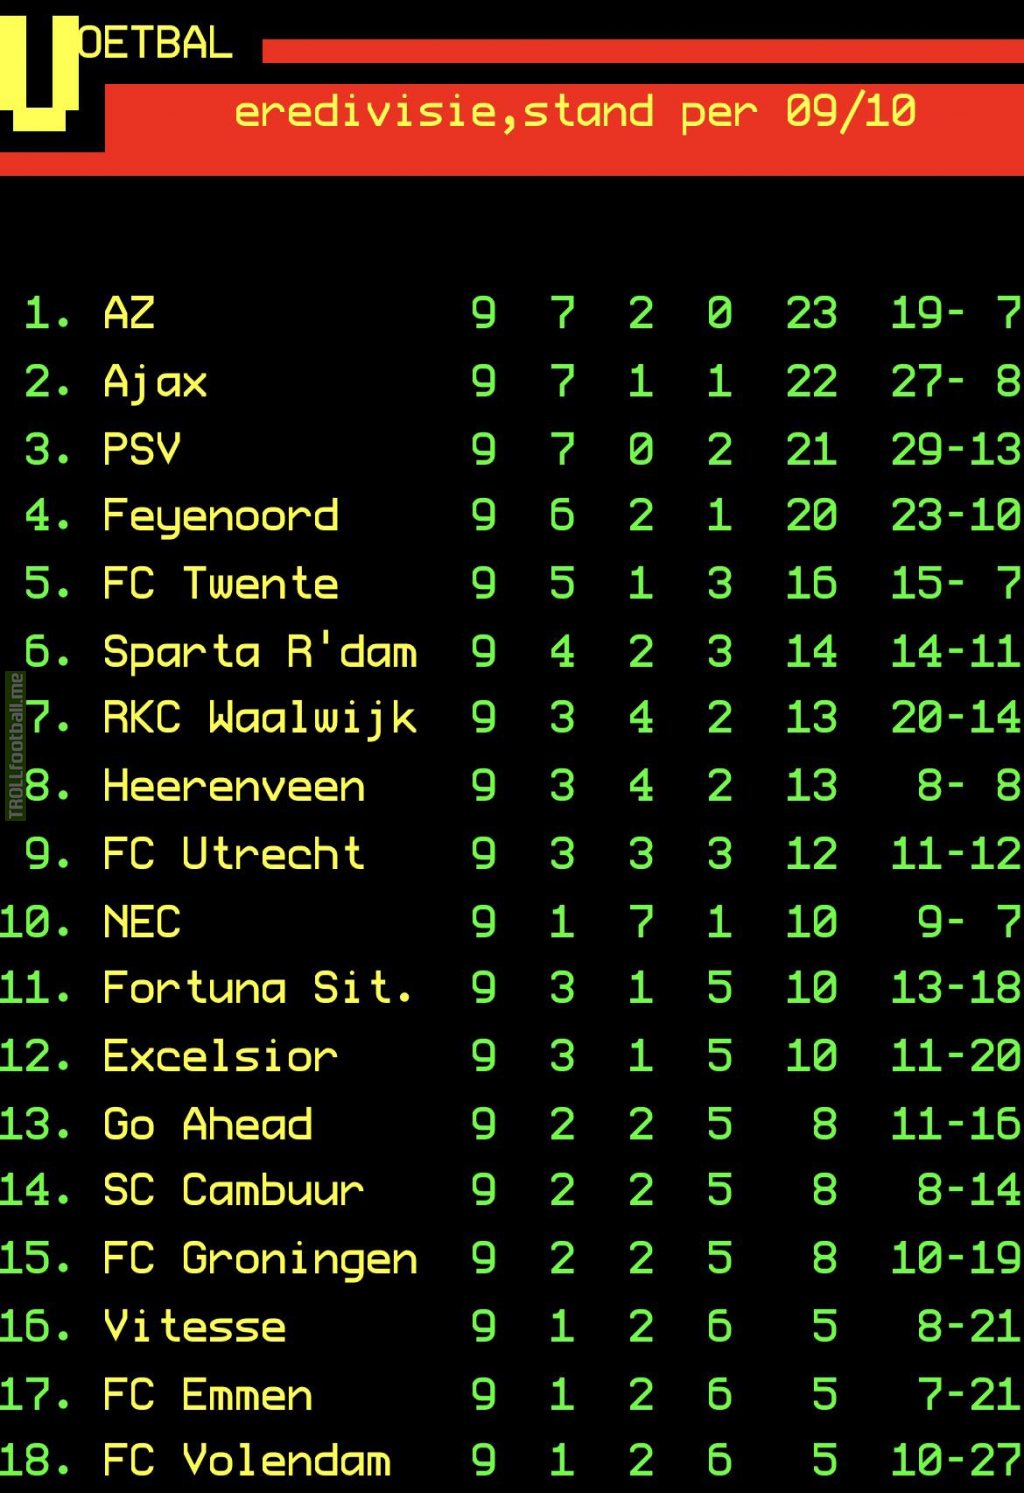 League table - Matchday 9